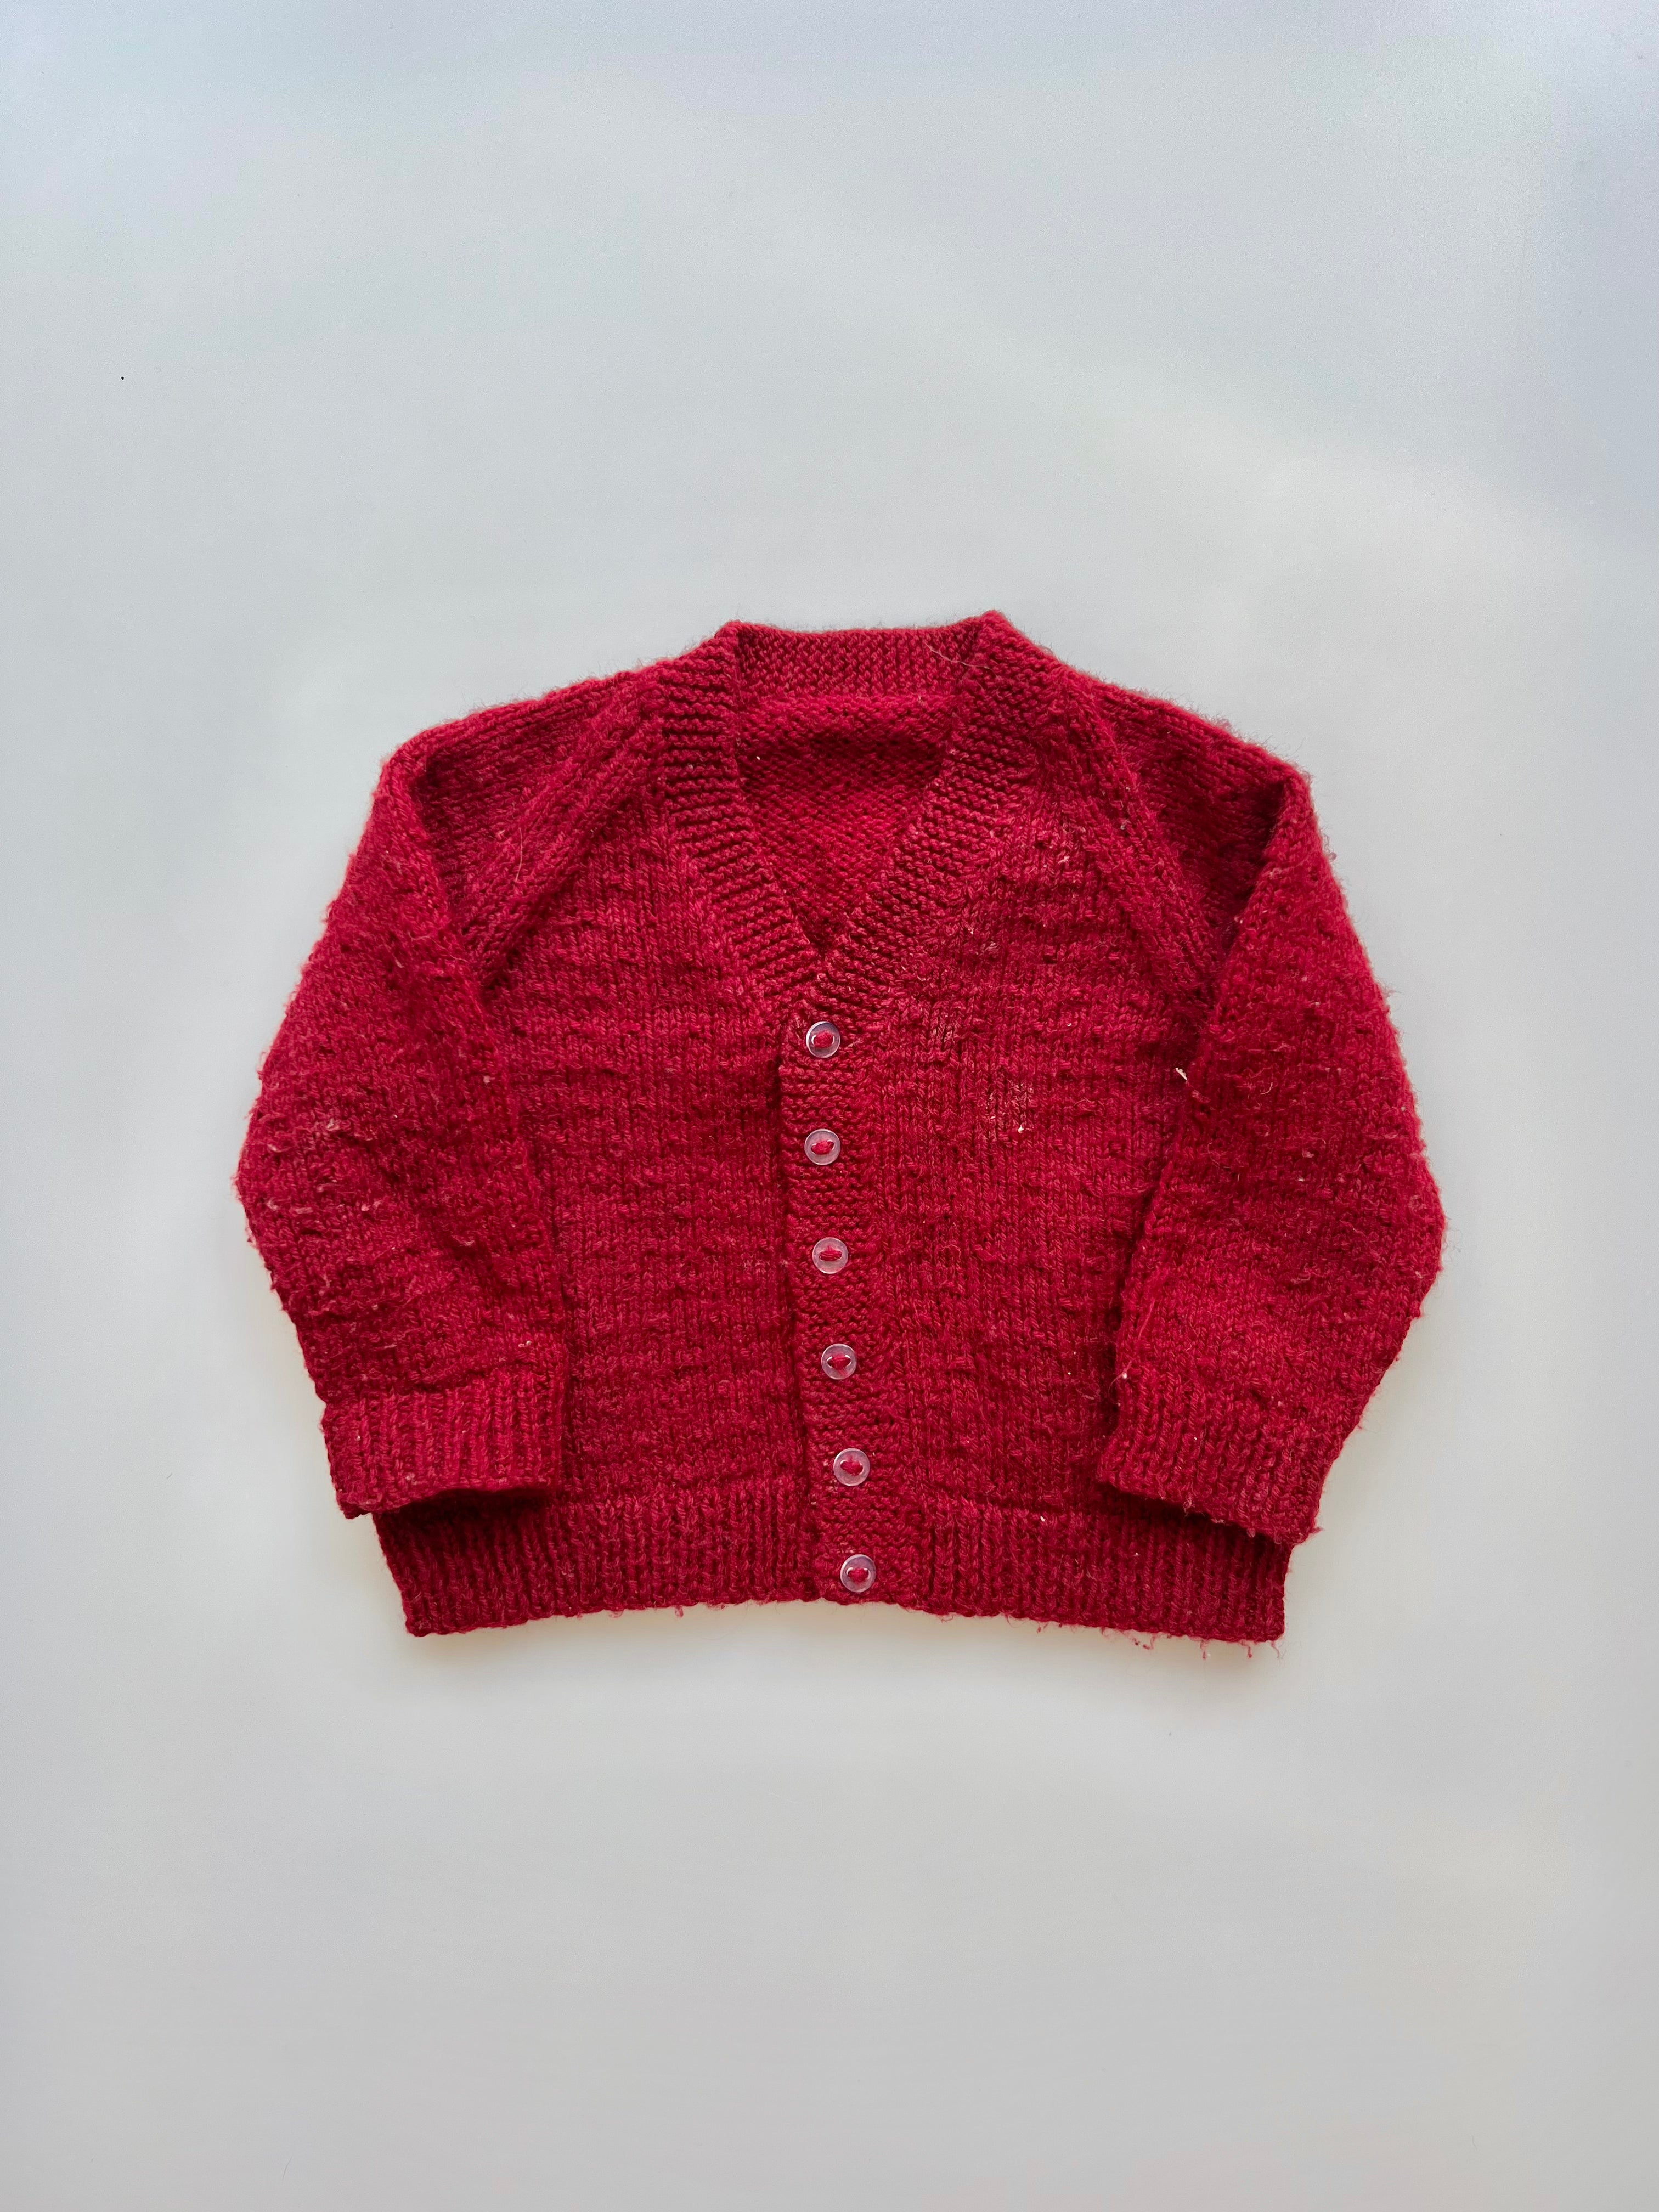 Hand Knitted Burgundy Cardigan 9-12 Months